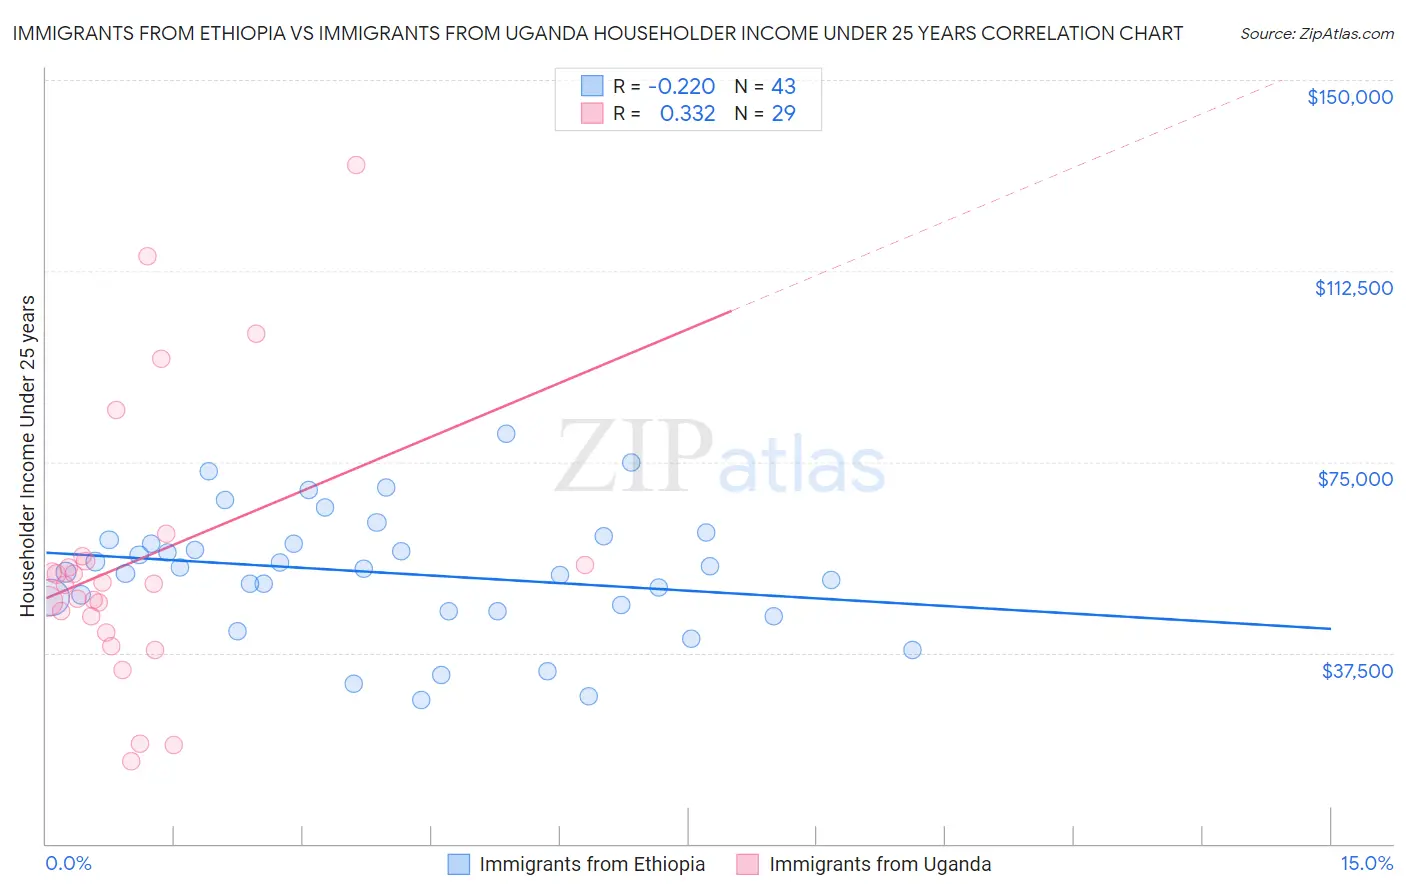 Immigrants from Ethiopia vs Immigrants from Uganda Householder Income Under 25 years